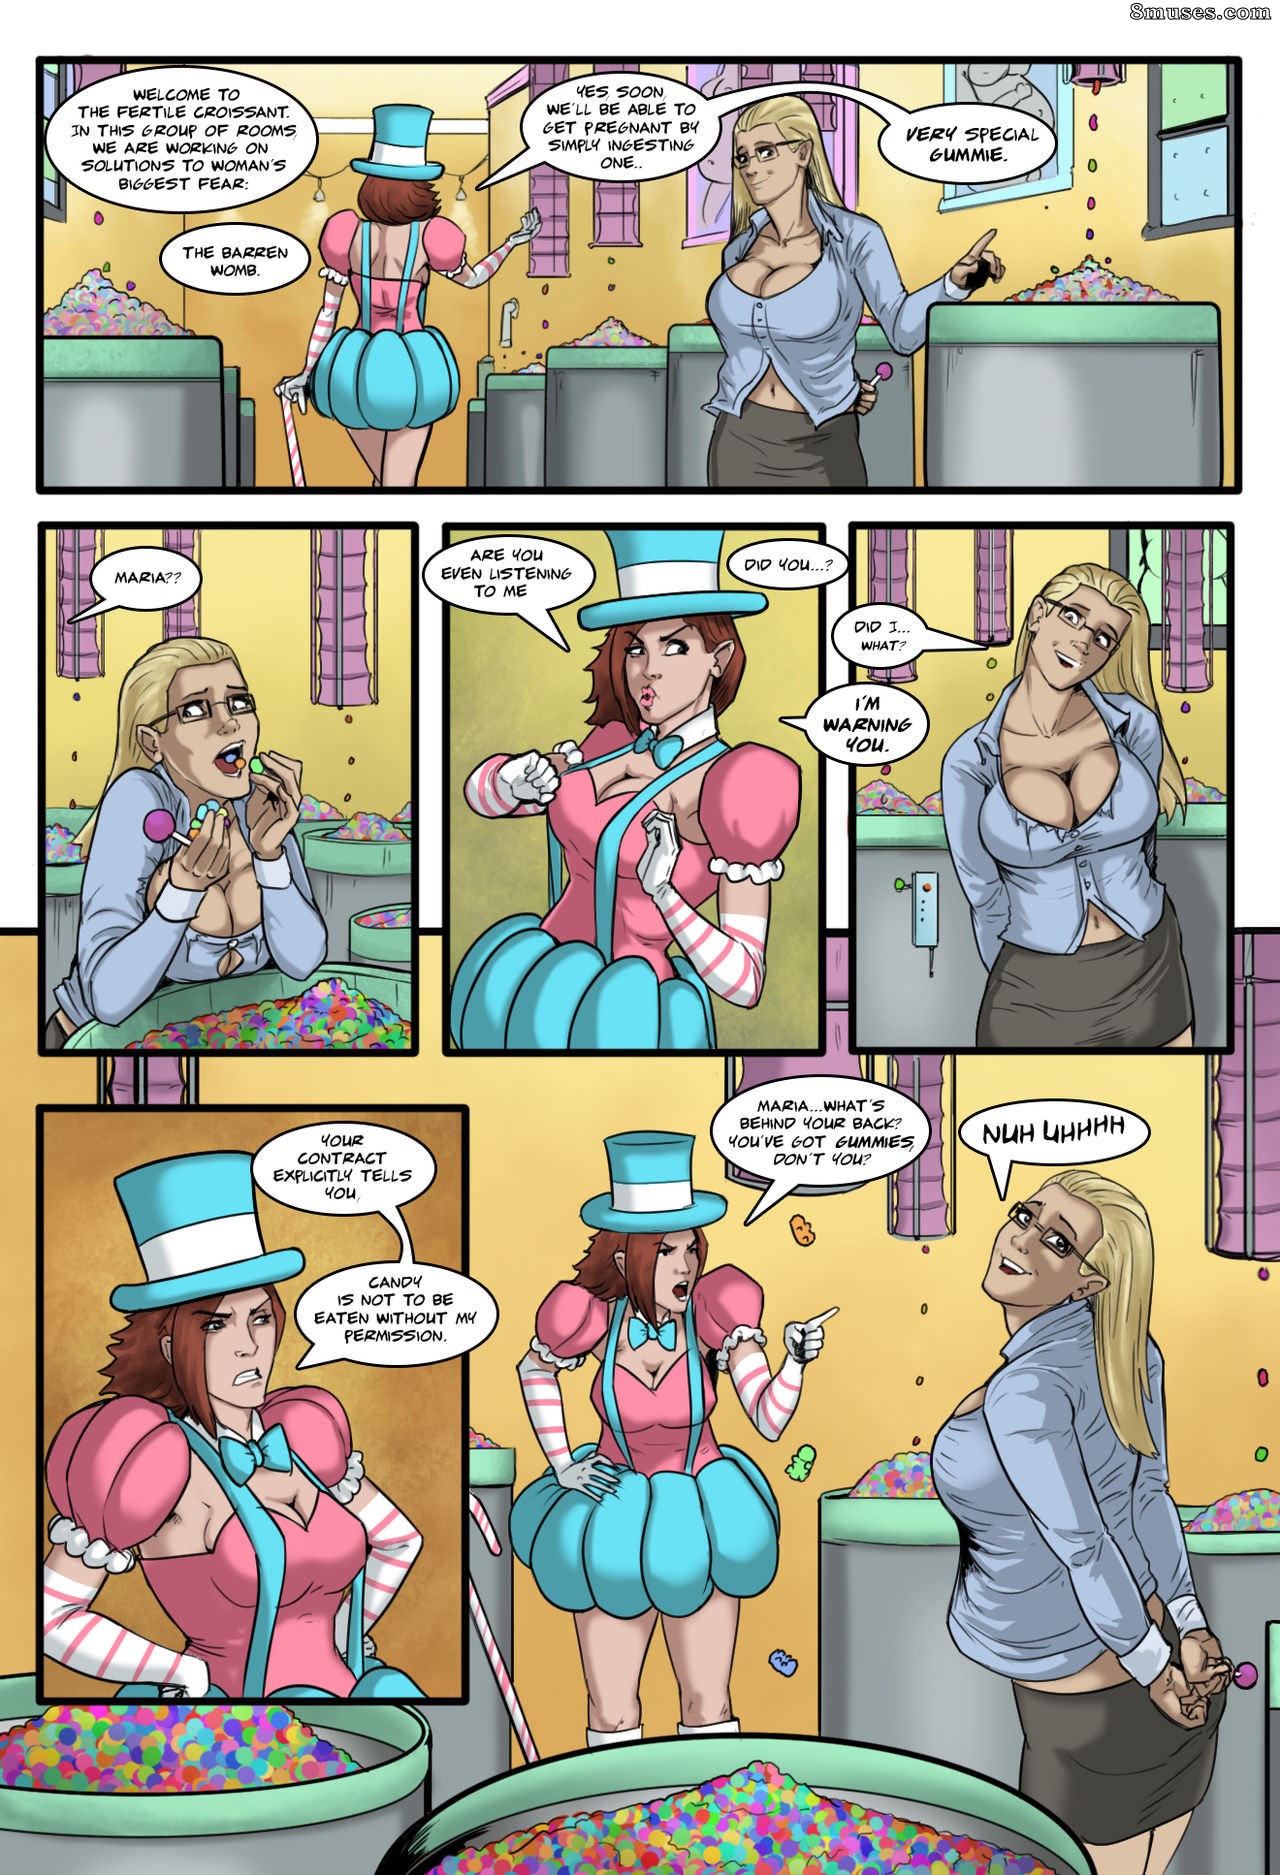 Wendy Wonka and the Pregnant Belly Issue 1 - 8muses Comics - Sex Comics and Porn  Cartoons